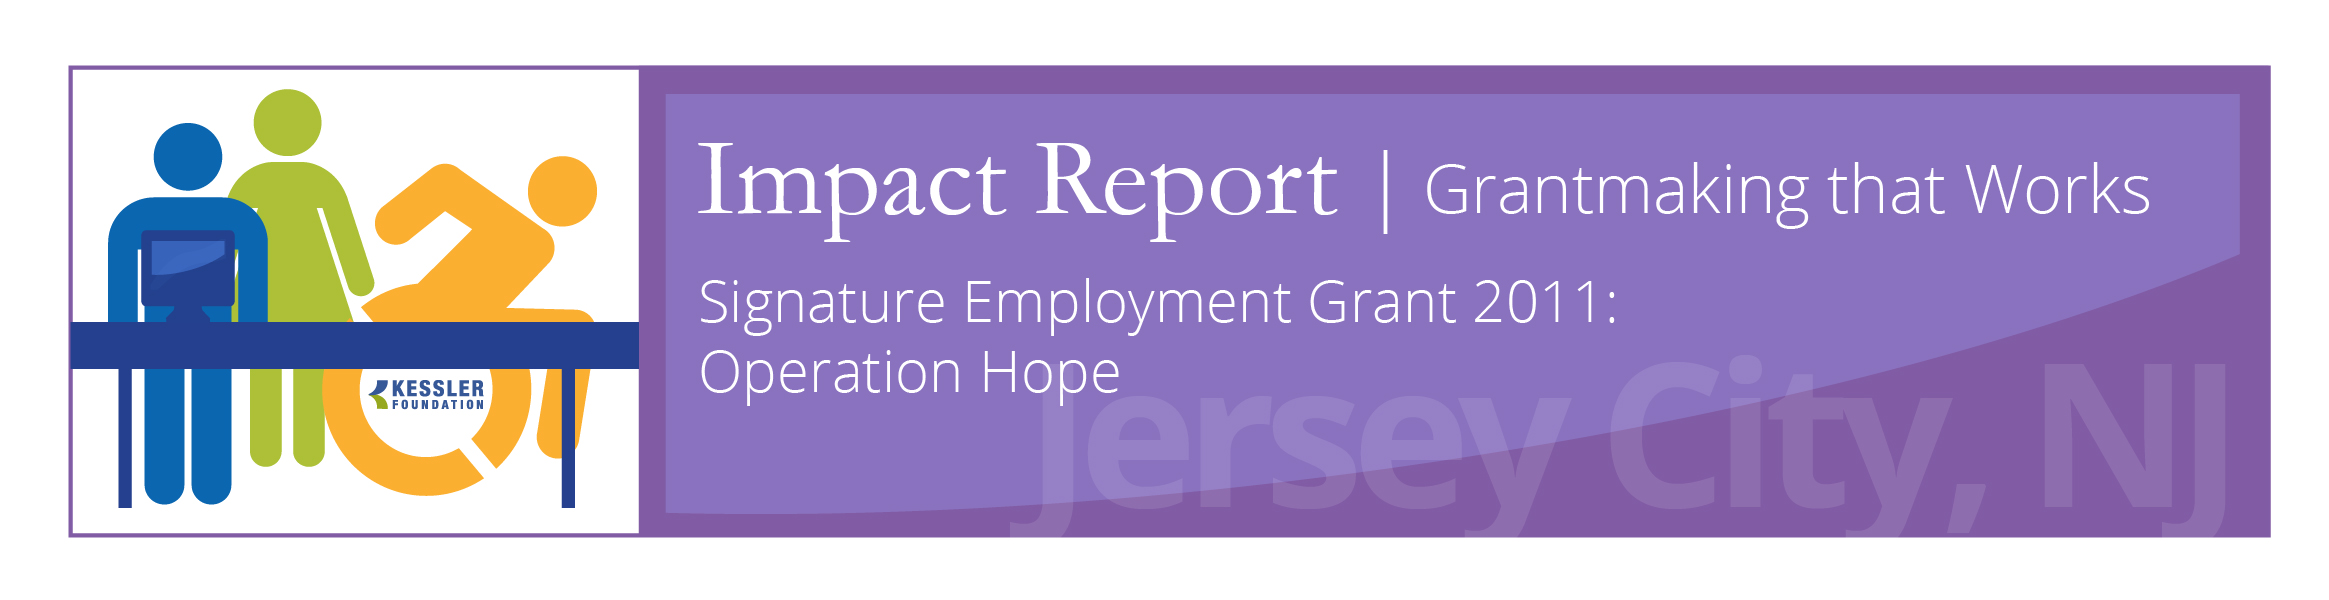 impact reports grantmaking that works 